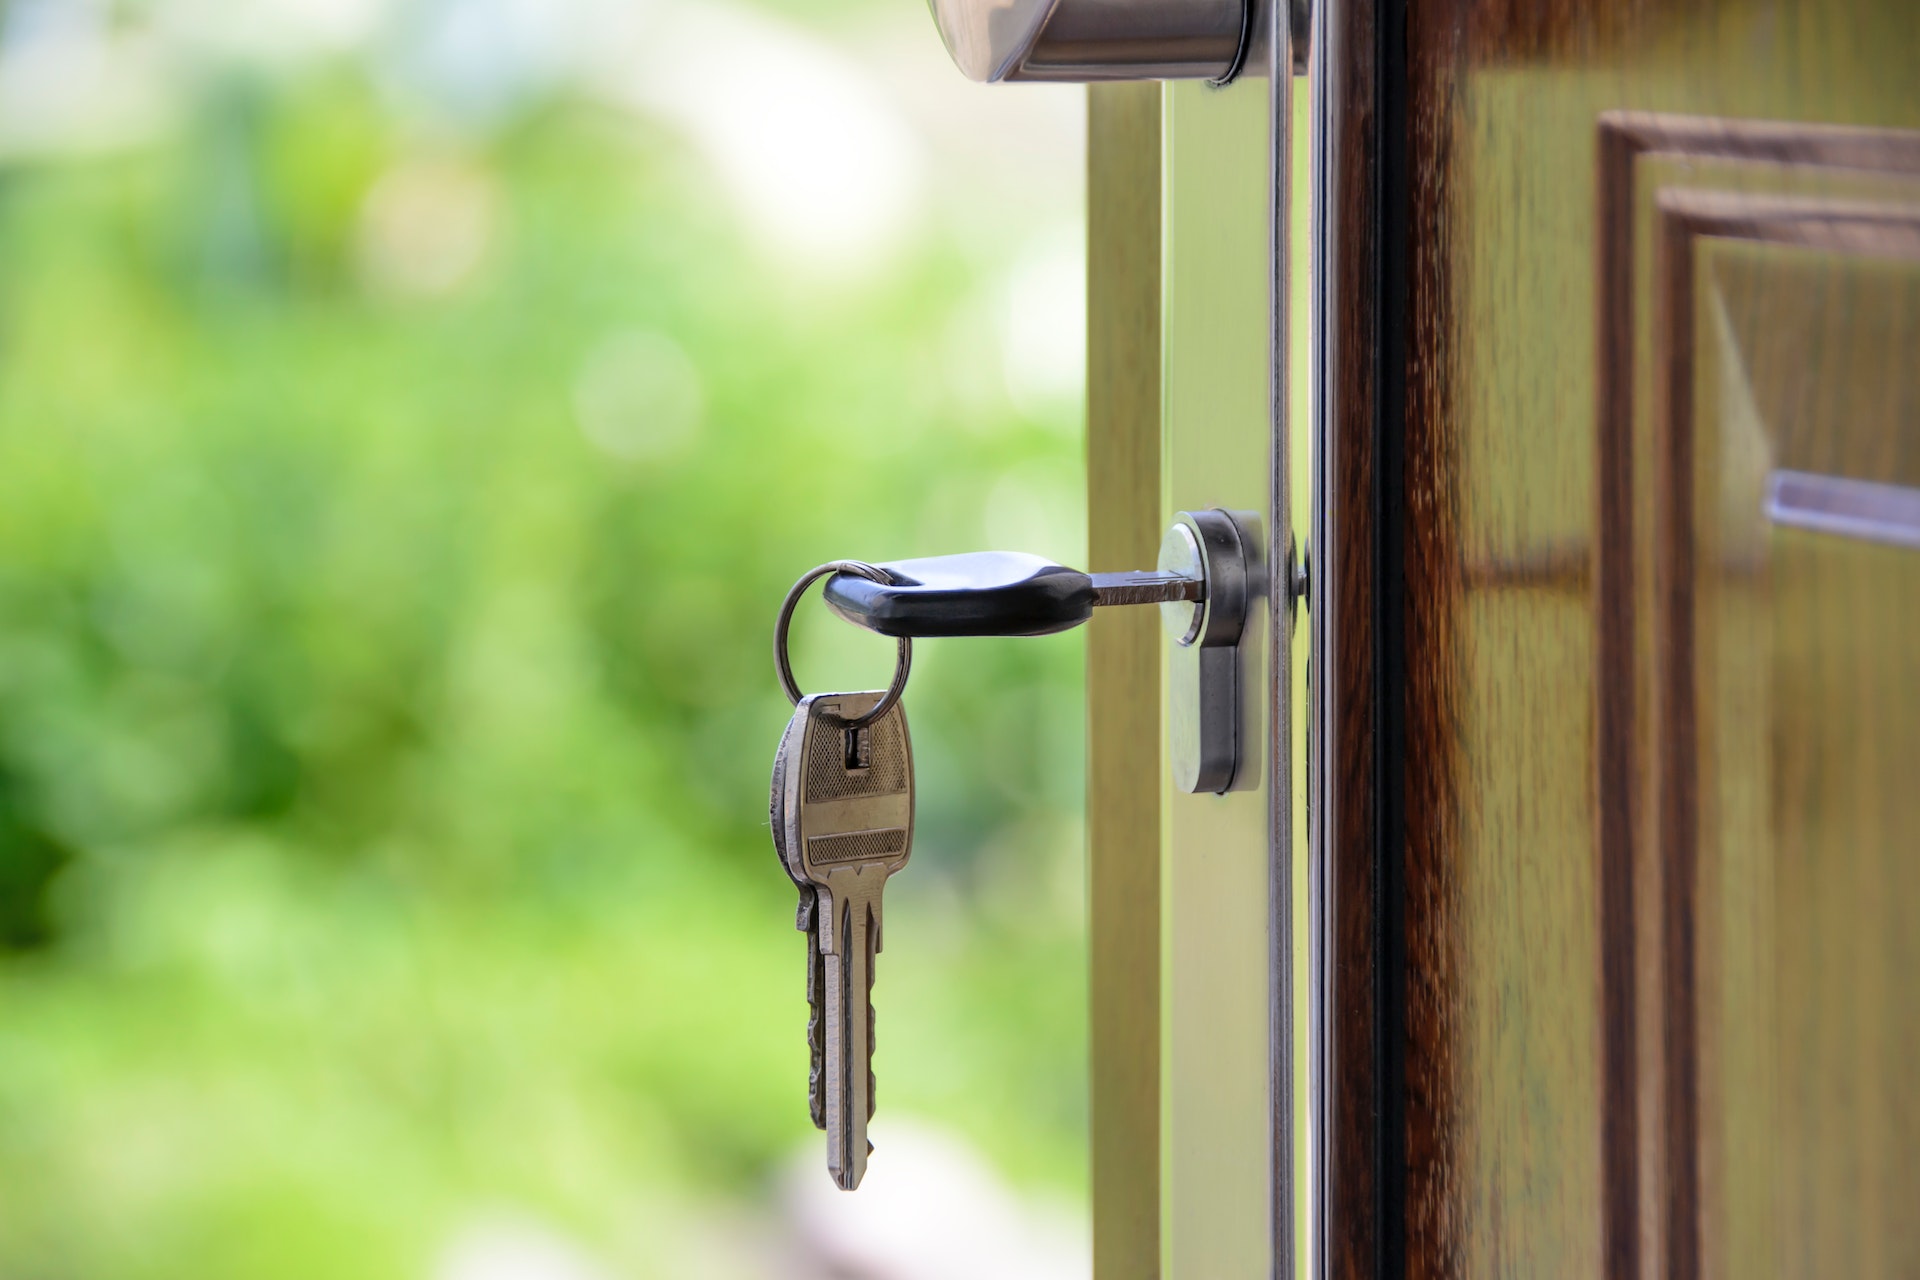 Keys are a preferred way for us to access your home